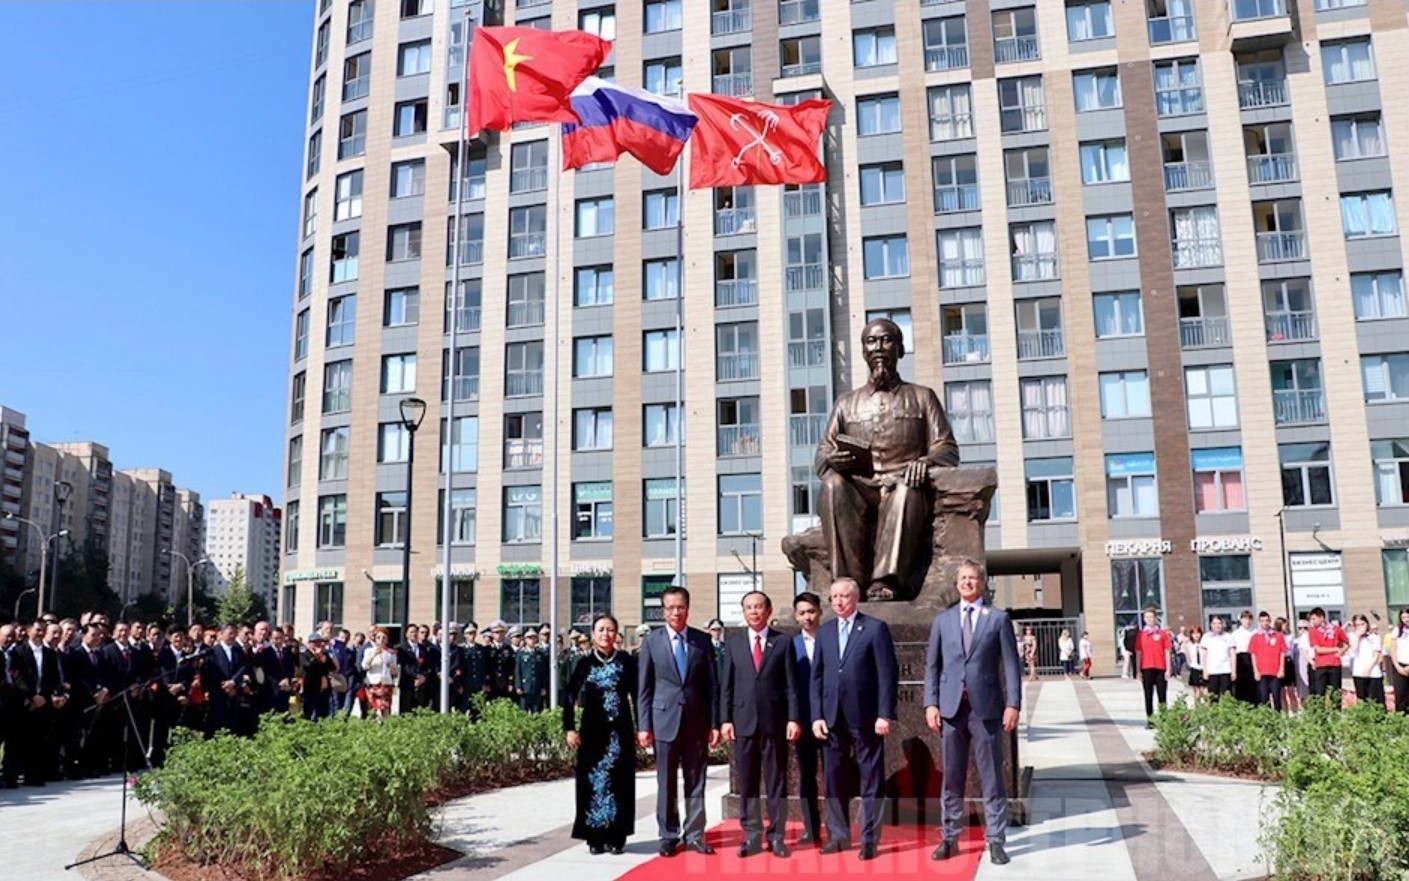 Ho Chi Minh City Party leader attends inauguration of statue of President Ho Chi Minh in Russia